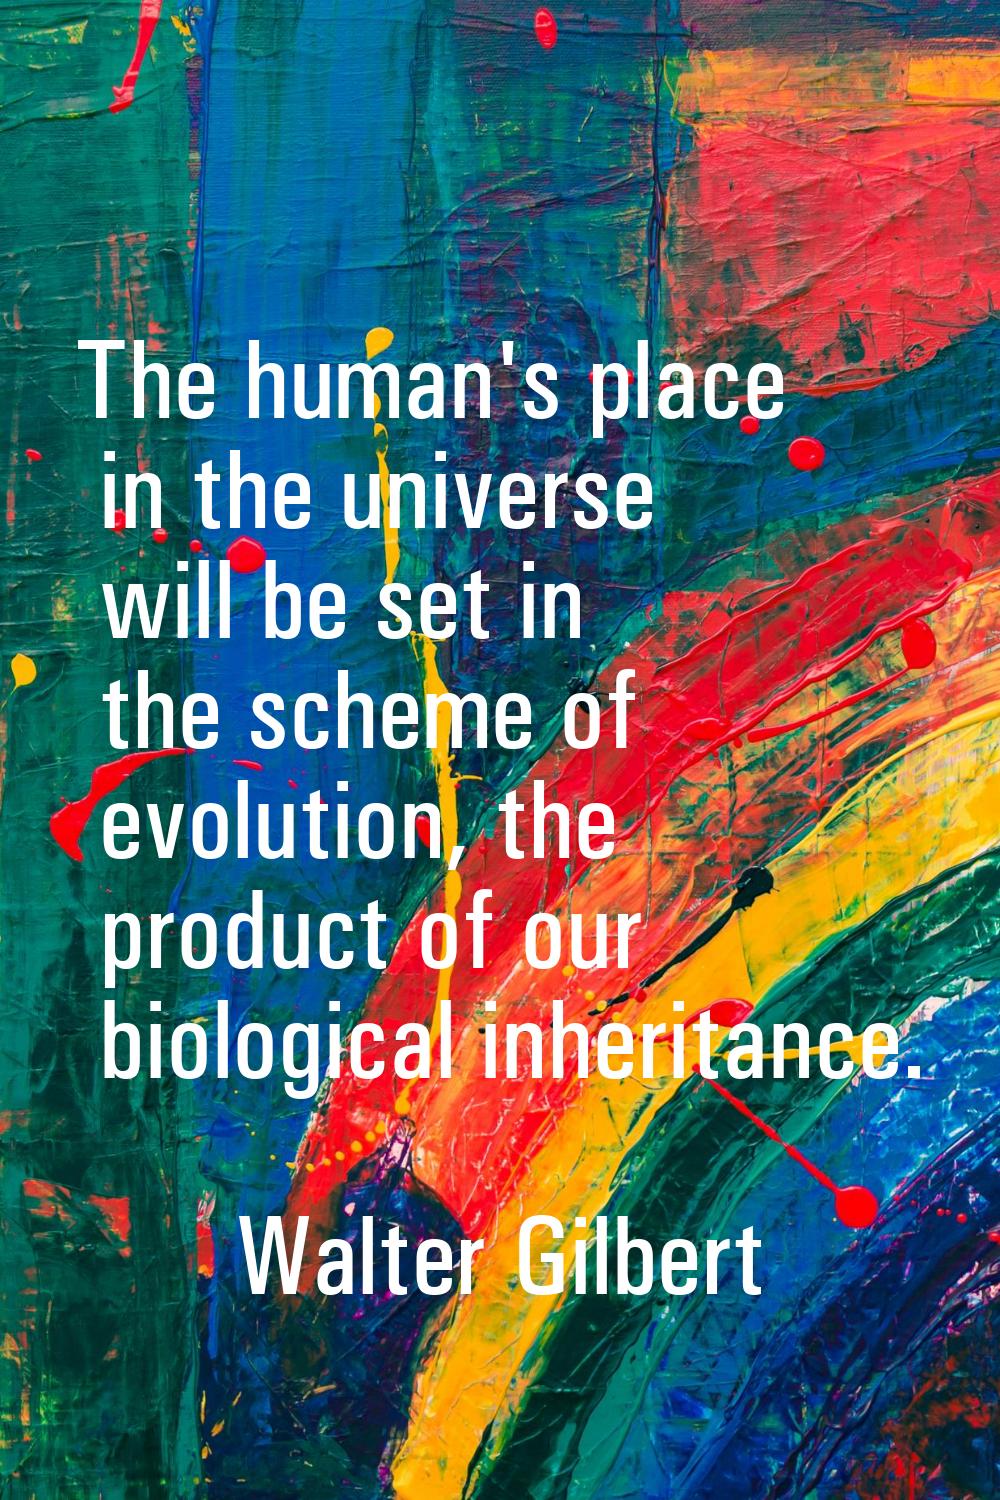 The human's place in the universe will be set in the scheme of evolution, the product of our biolog